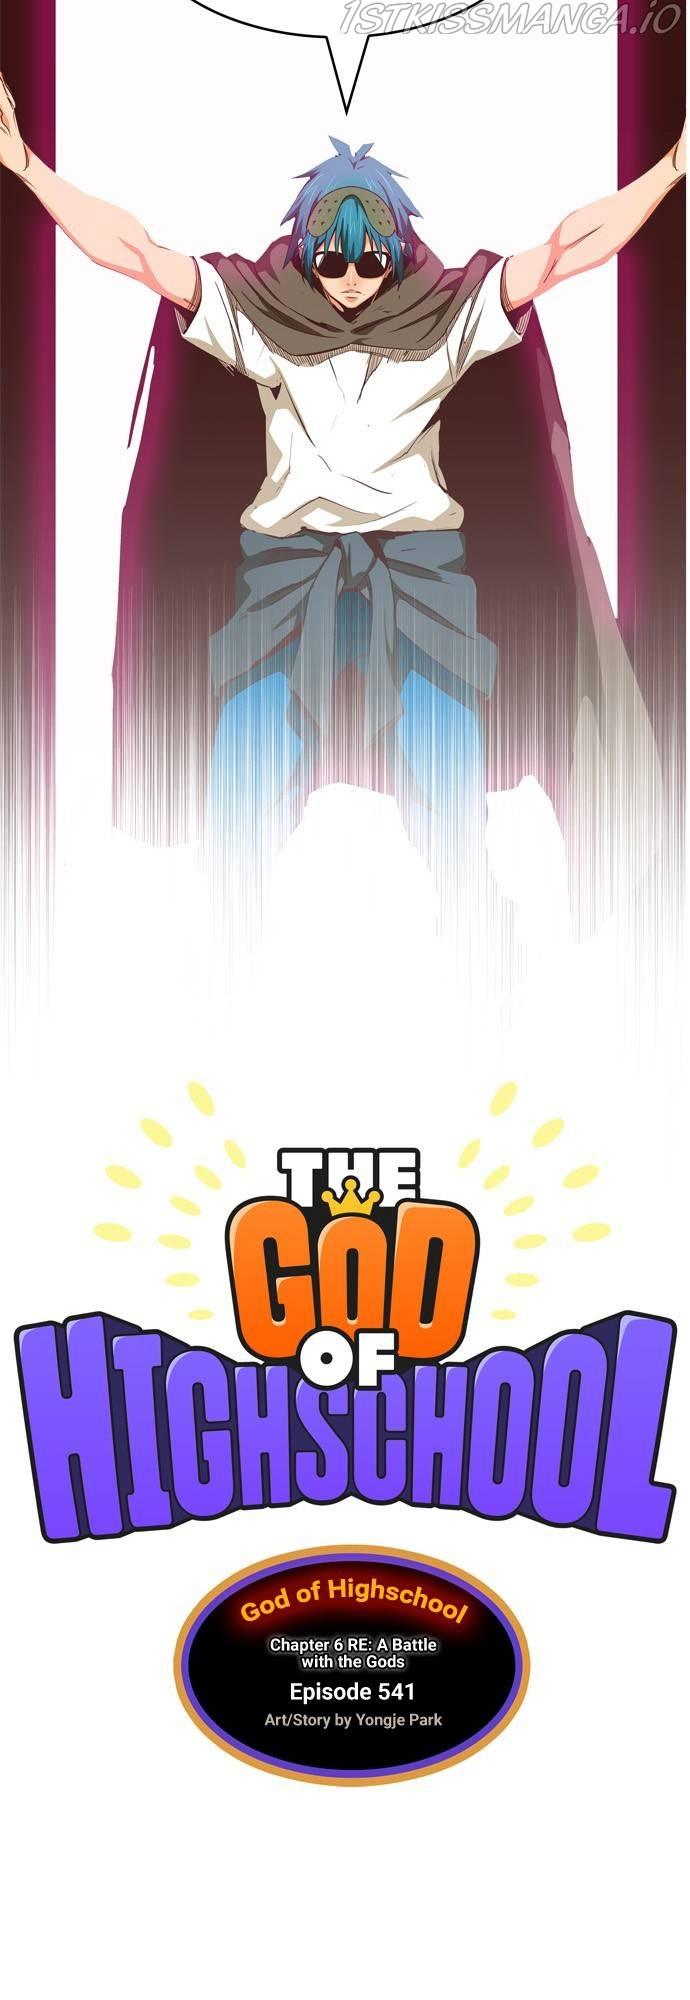 The God of High School - episode 540 - 16